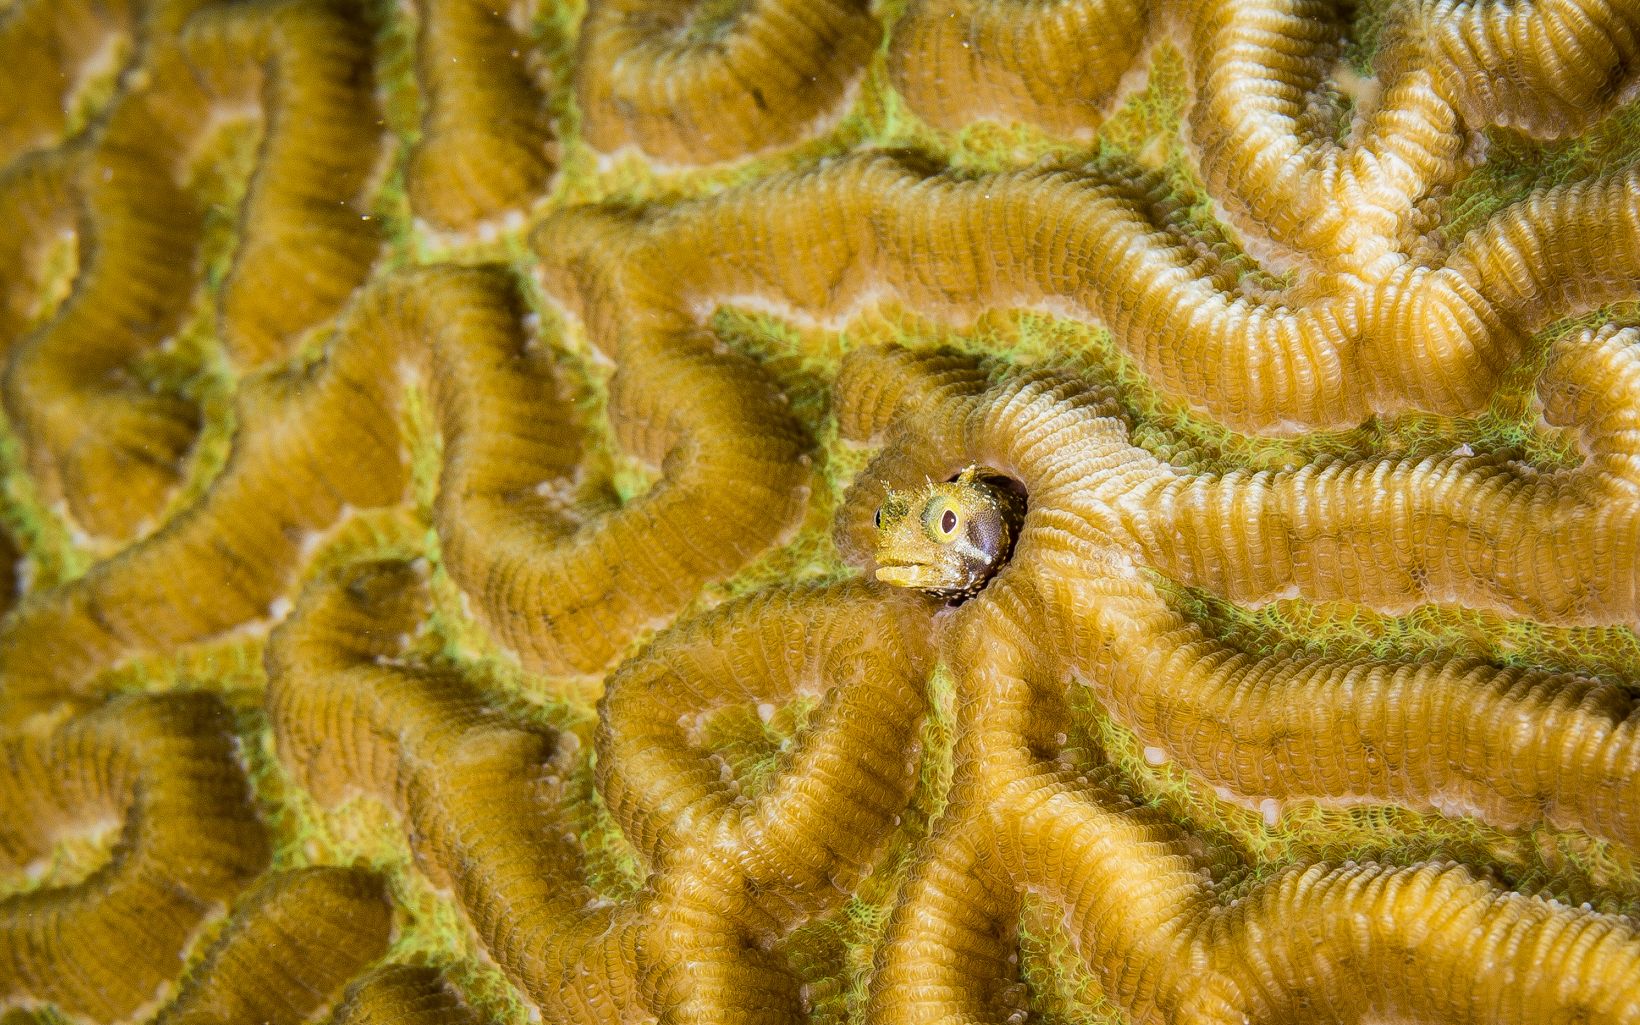 Brain Coral The consequences and implications of coral die-offs are numerous—for marine ecosystems, yes, but also for people around the world. © Ralph Pace